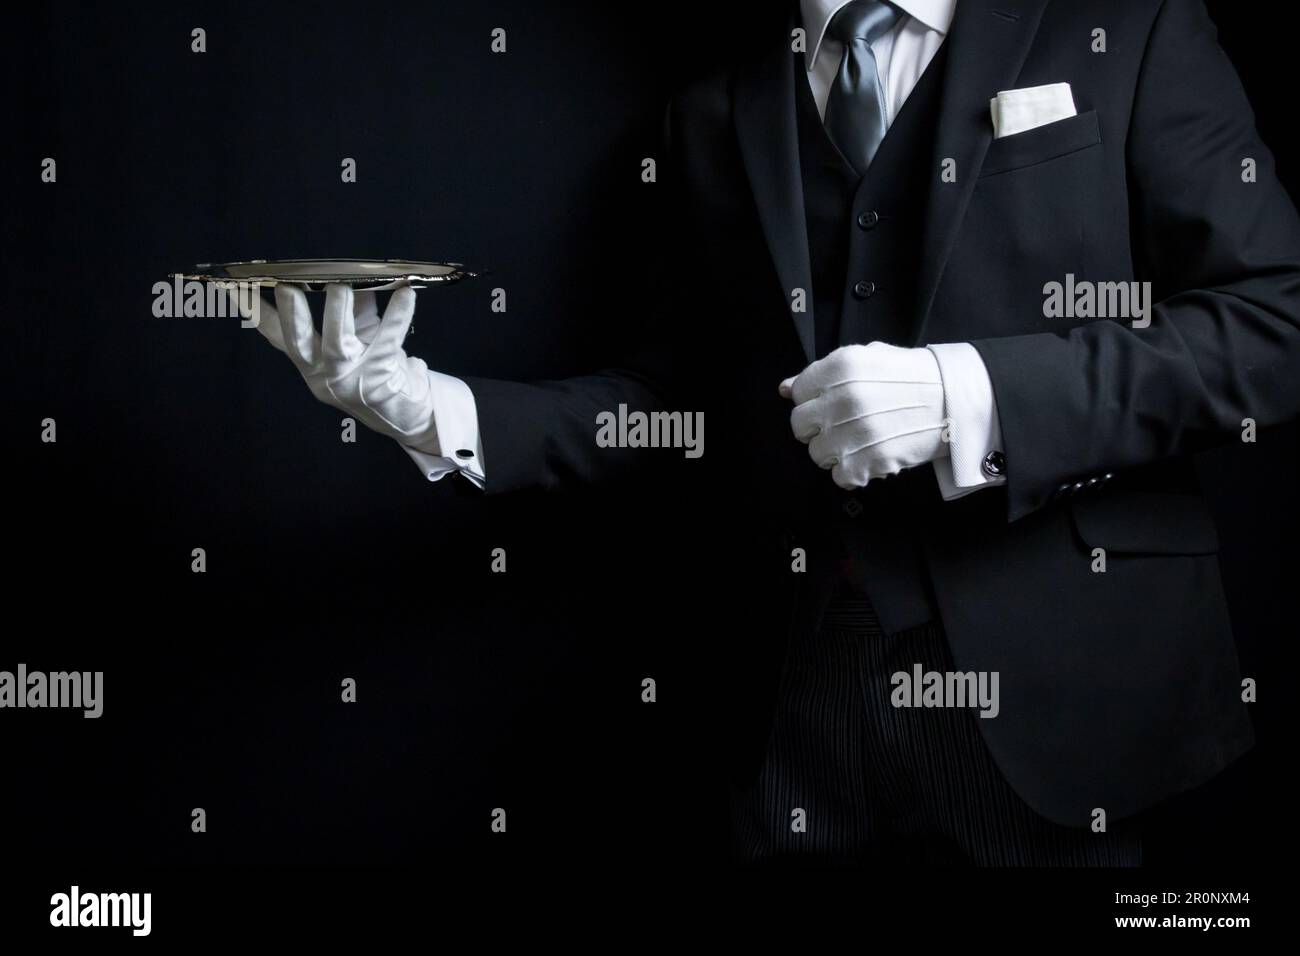 Portrait of Elegant Butler or Concierge in Dark Suit and White Gloves Holding Silver Serving Tray. Stock Photo